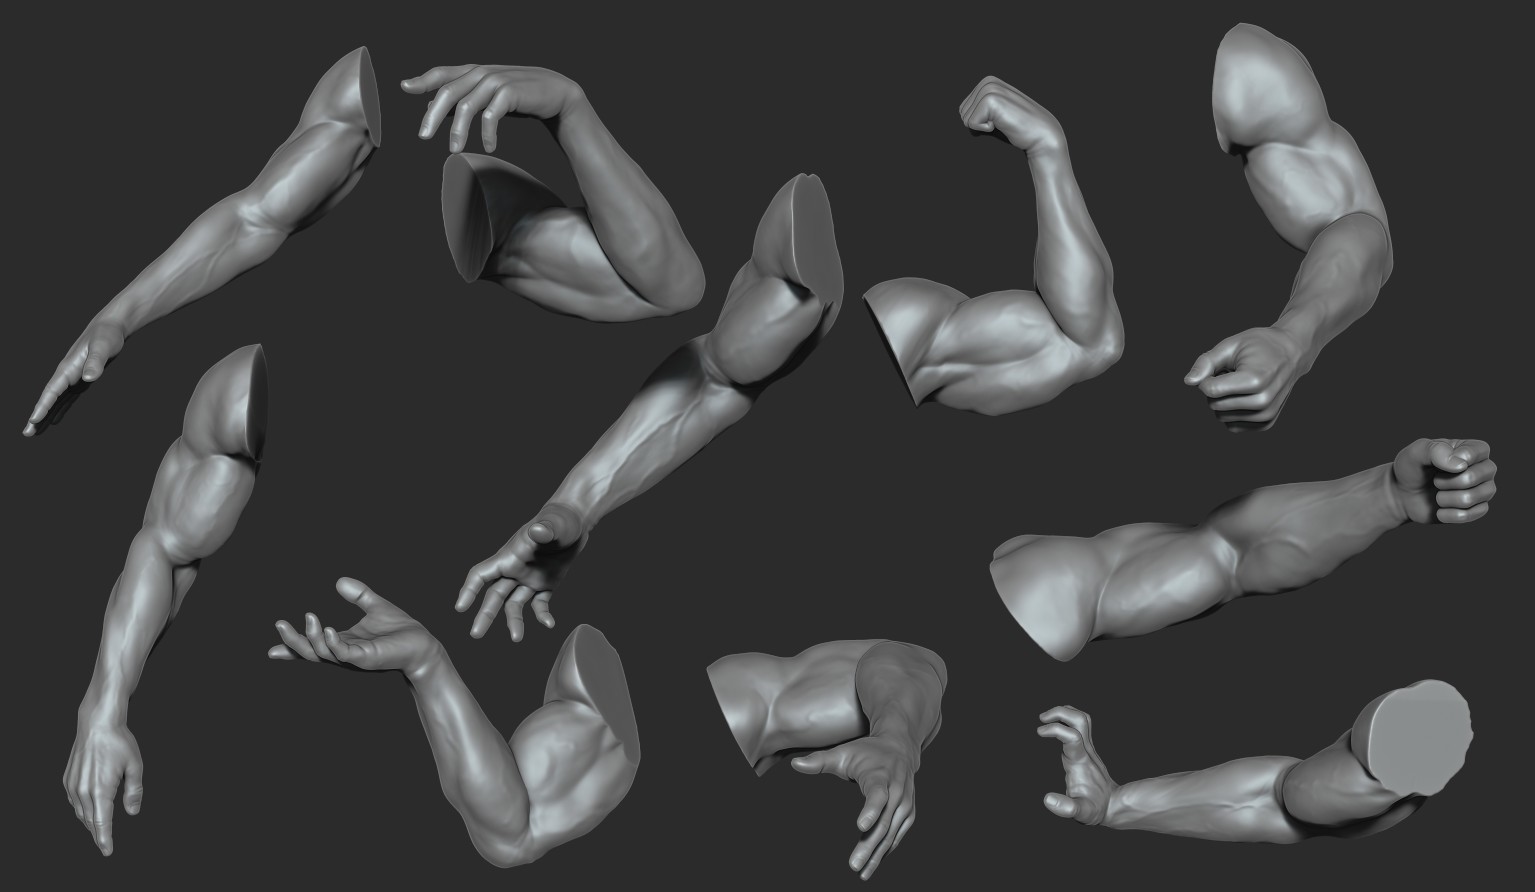 ArtStation - Muscular Male Arms 10 Poses | Resources